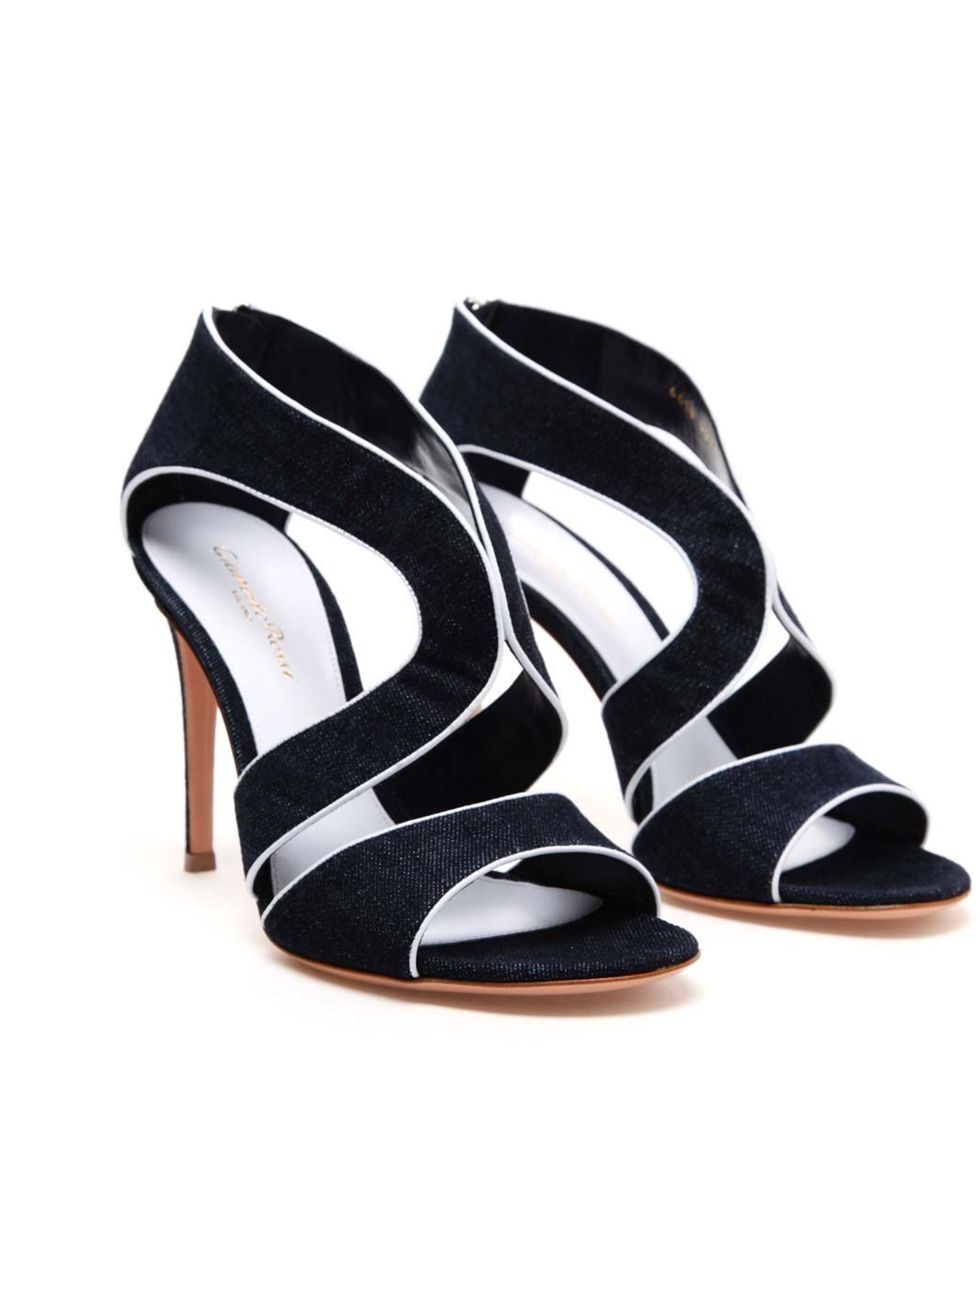 <p>Gianvito Rossi denim cut-out sandals, £445, available from <a href="http://www.brownsfashion.com/product/LS4I52670002/193/denim-cutout-sandals">Browns</a></p>